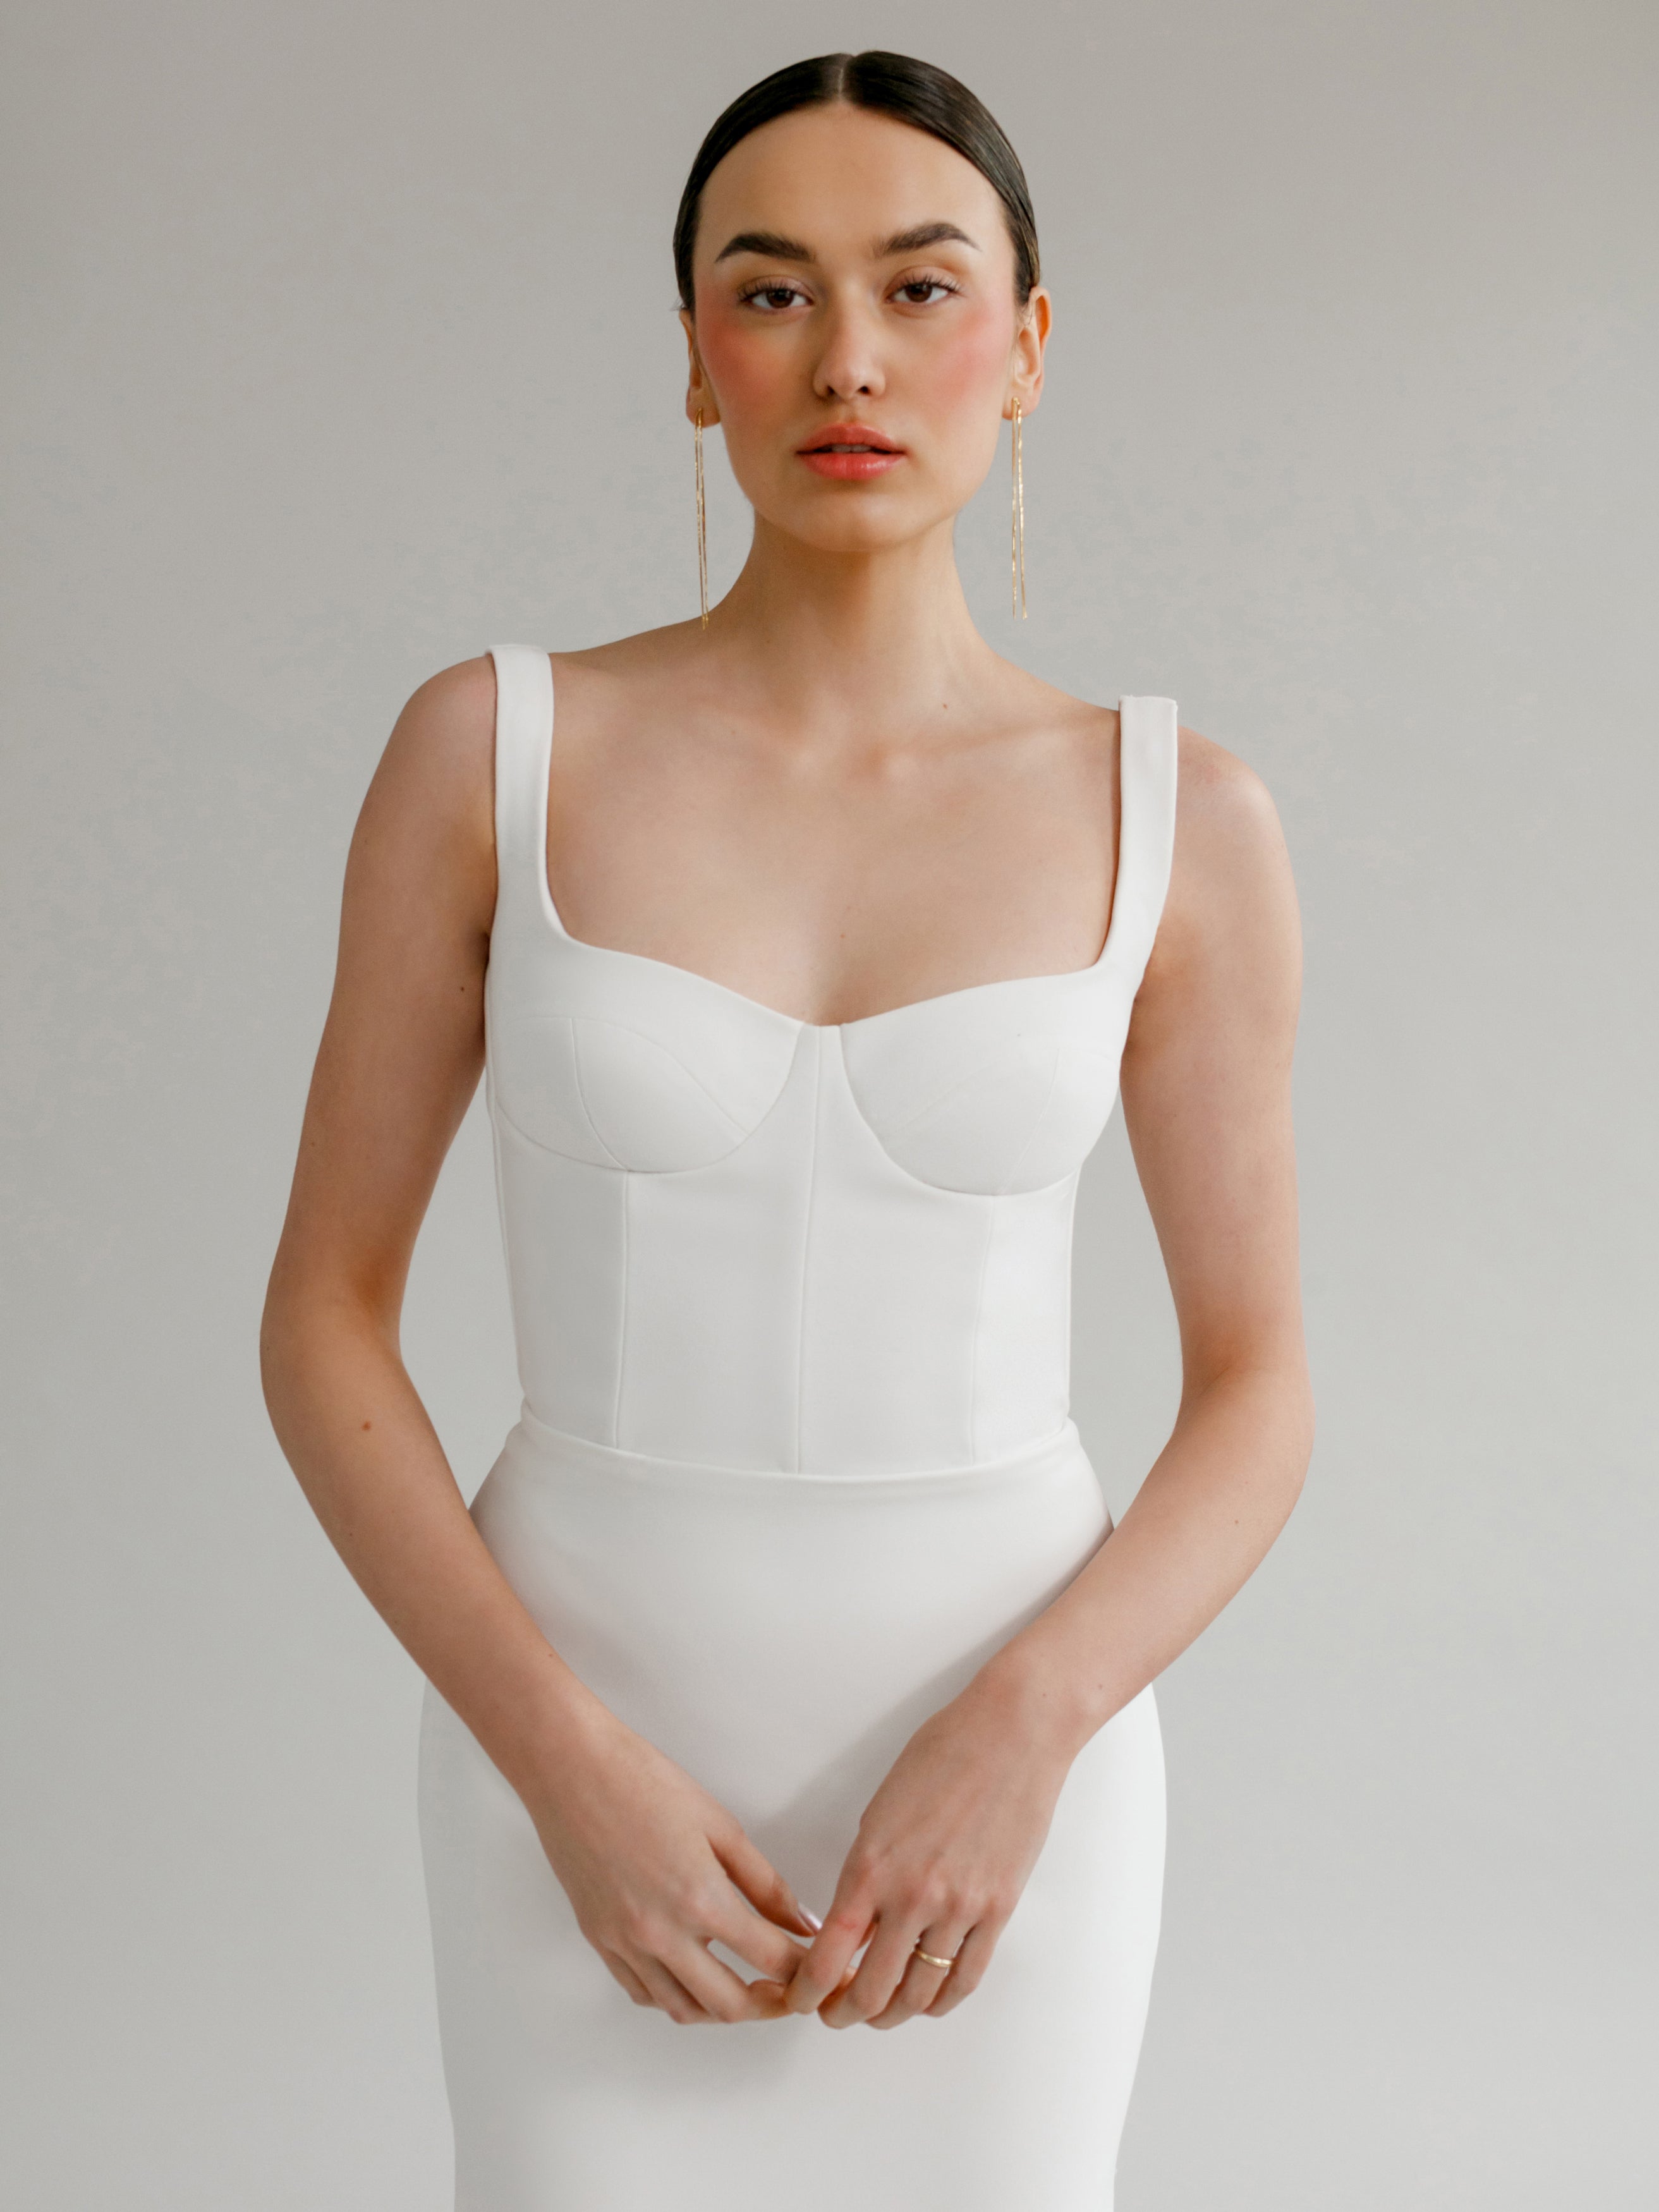 Angelica : A wedding gown with a bustier-style bodice + low back